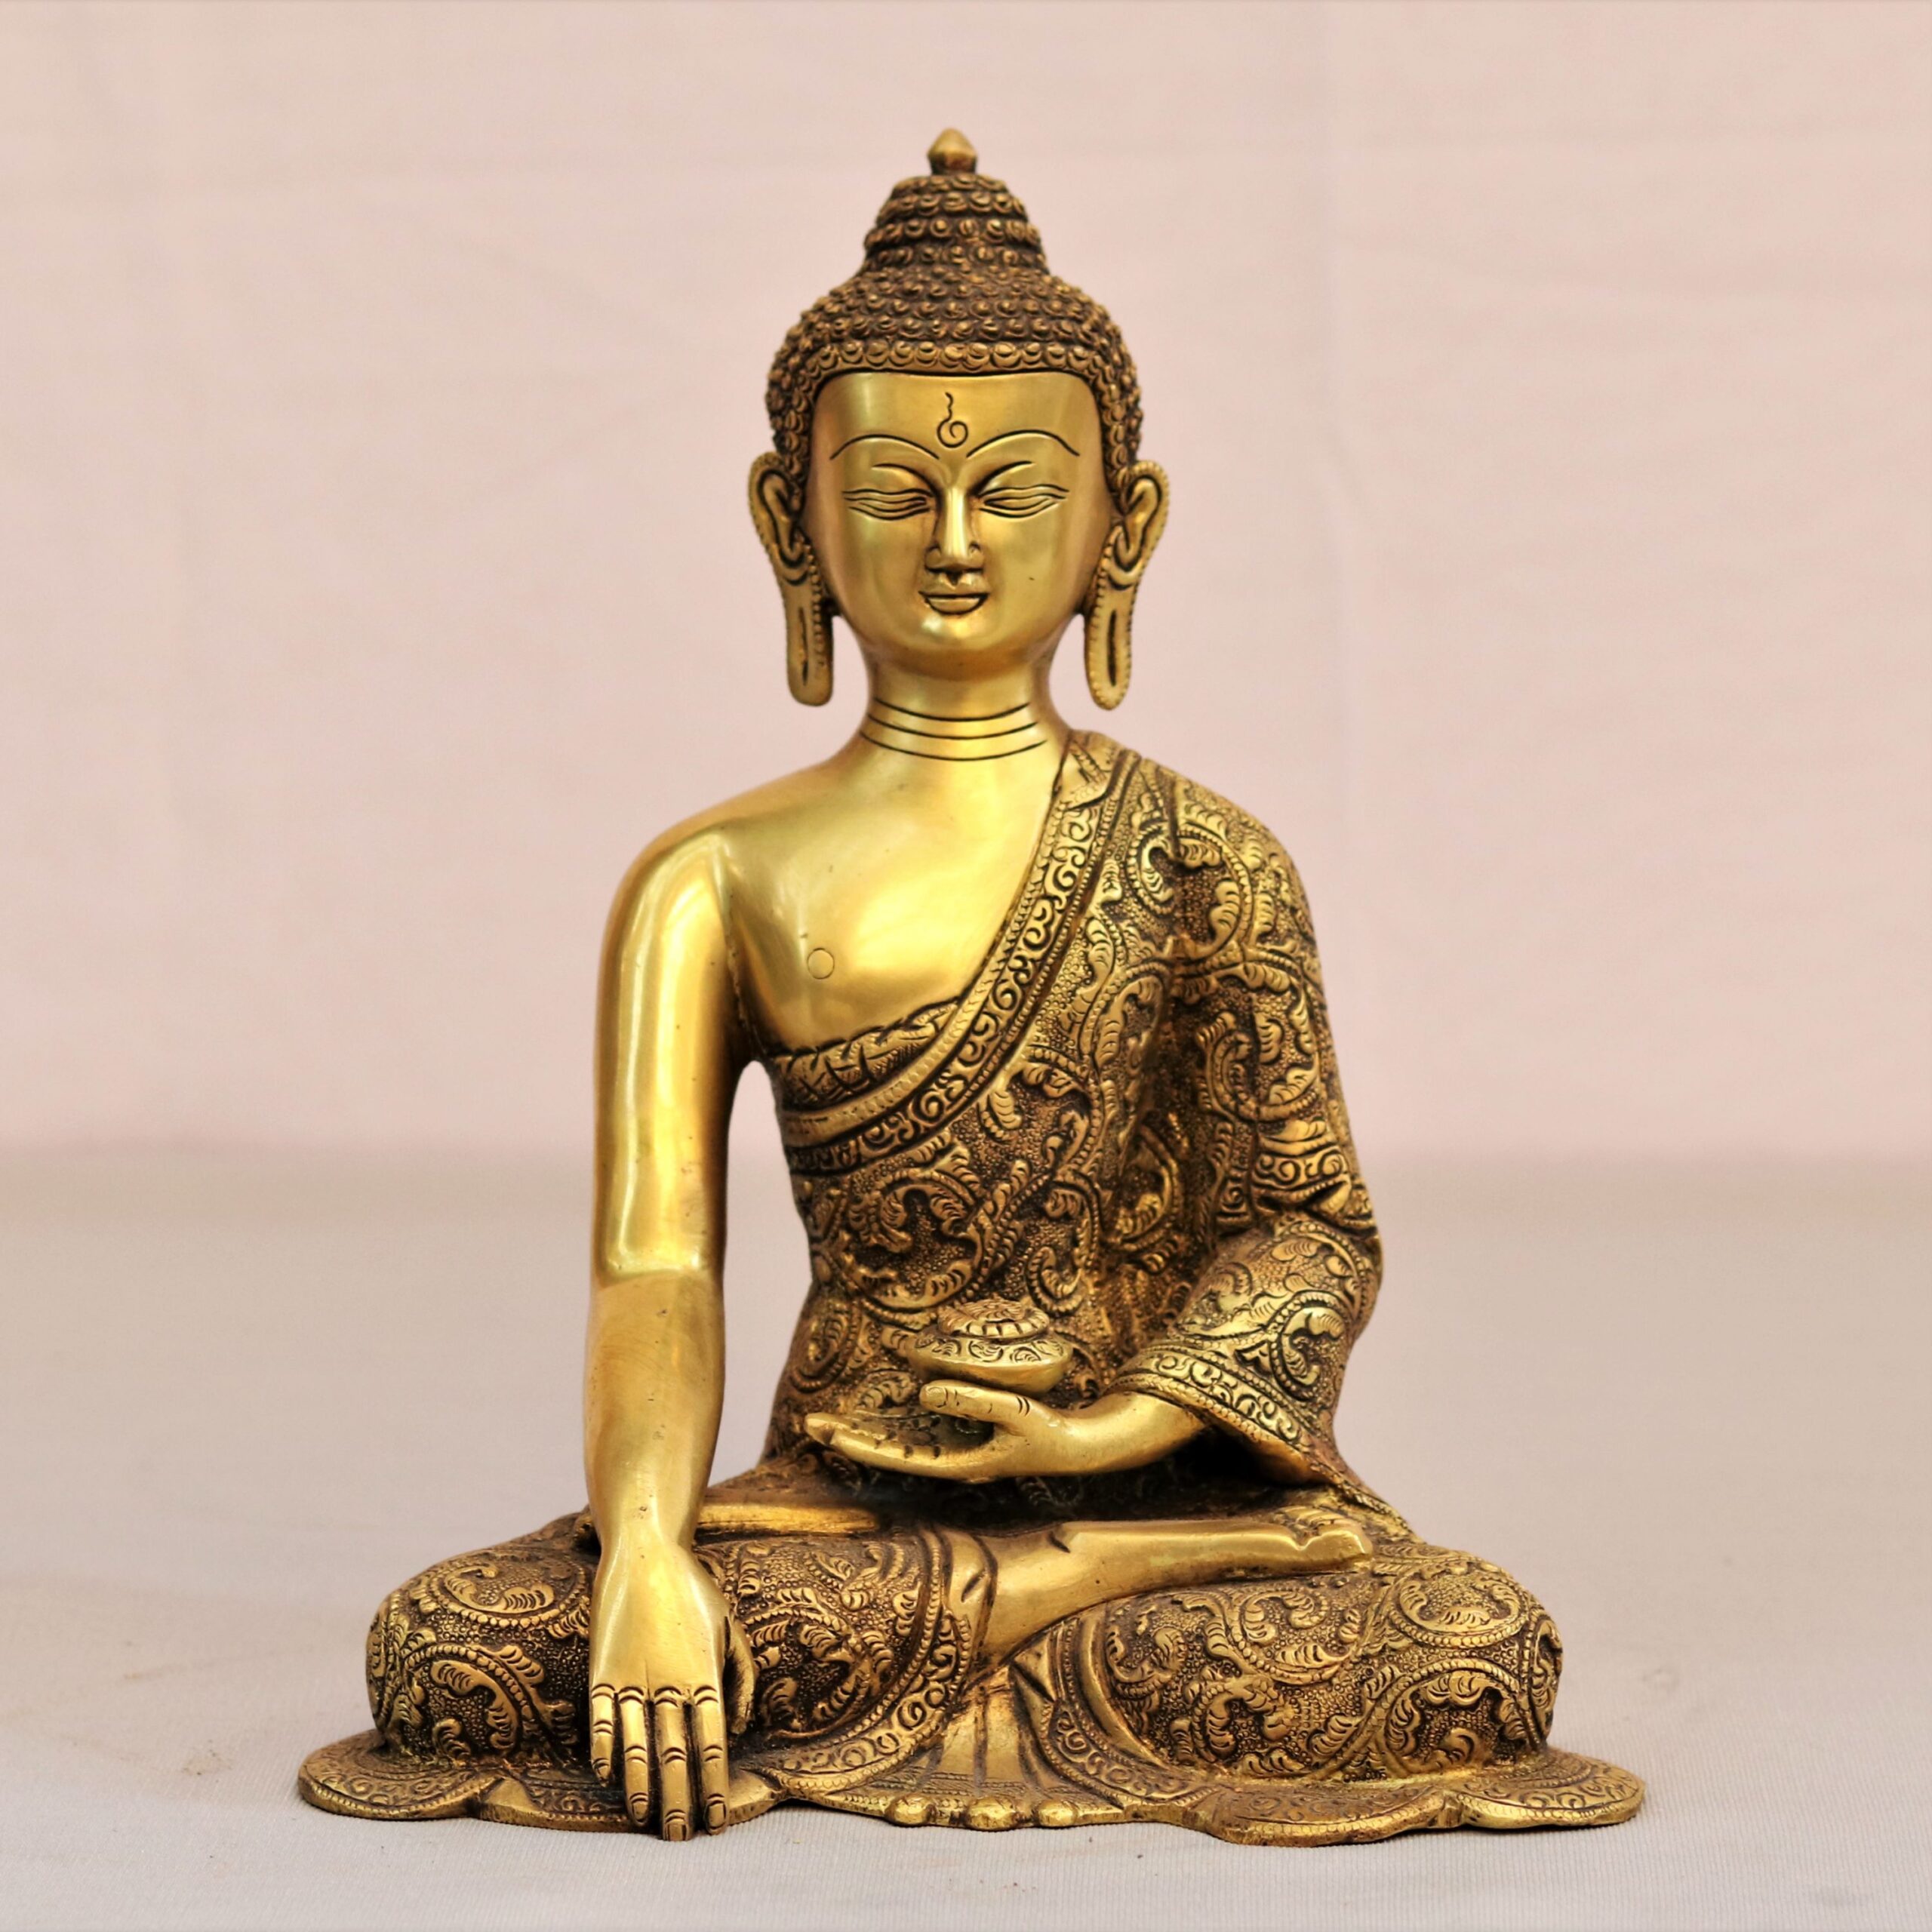 Brass Statue Archives - Buy exclusive brass statues, collectibles and decor